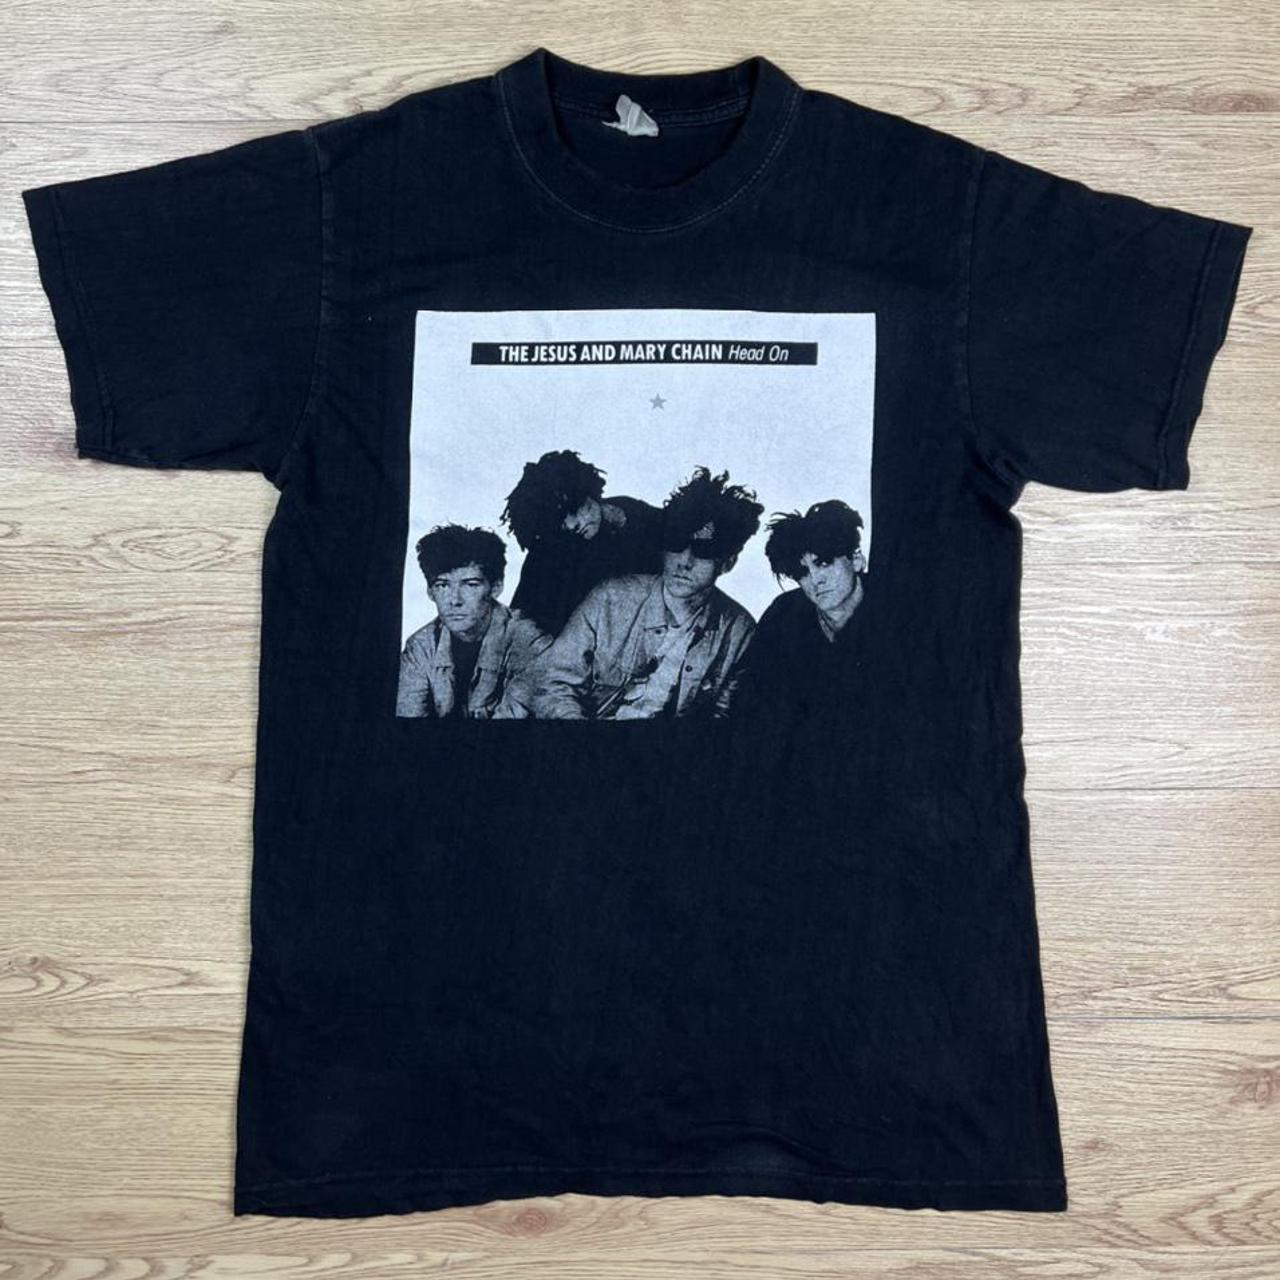 Vintage The Jesus And mary Chain Promo Tshirt